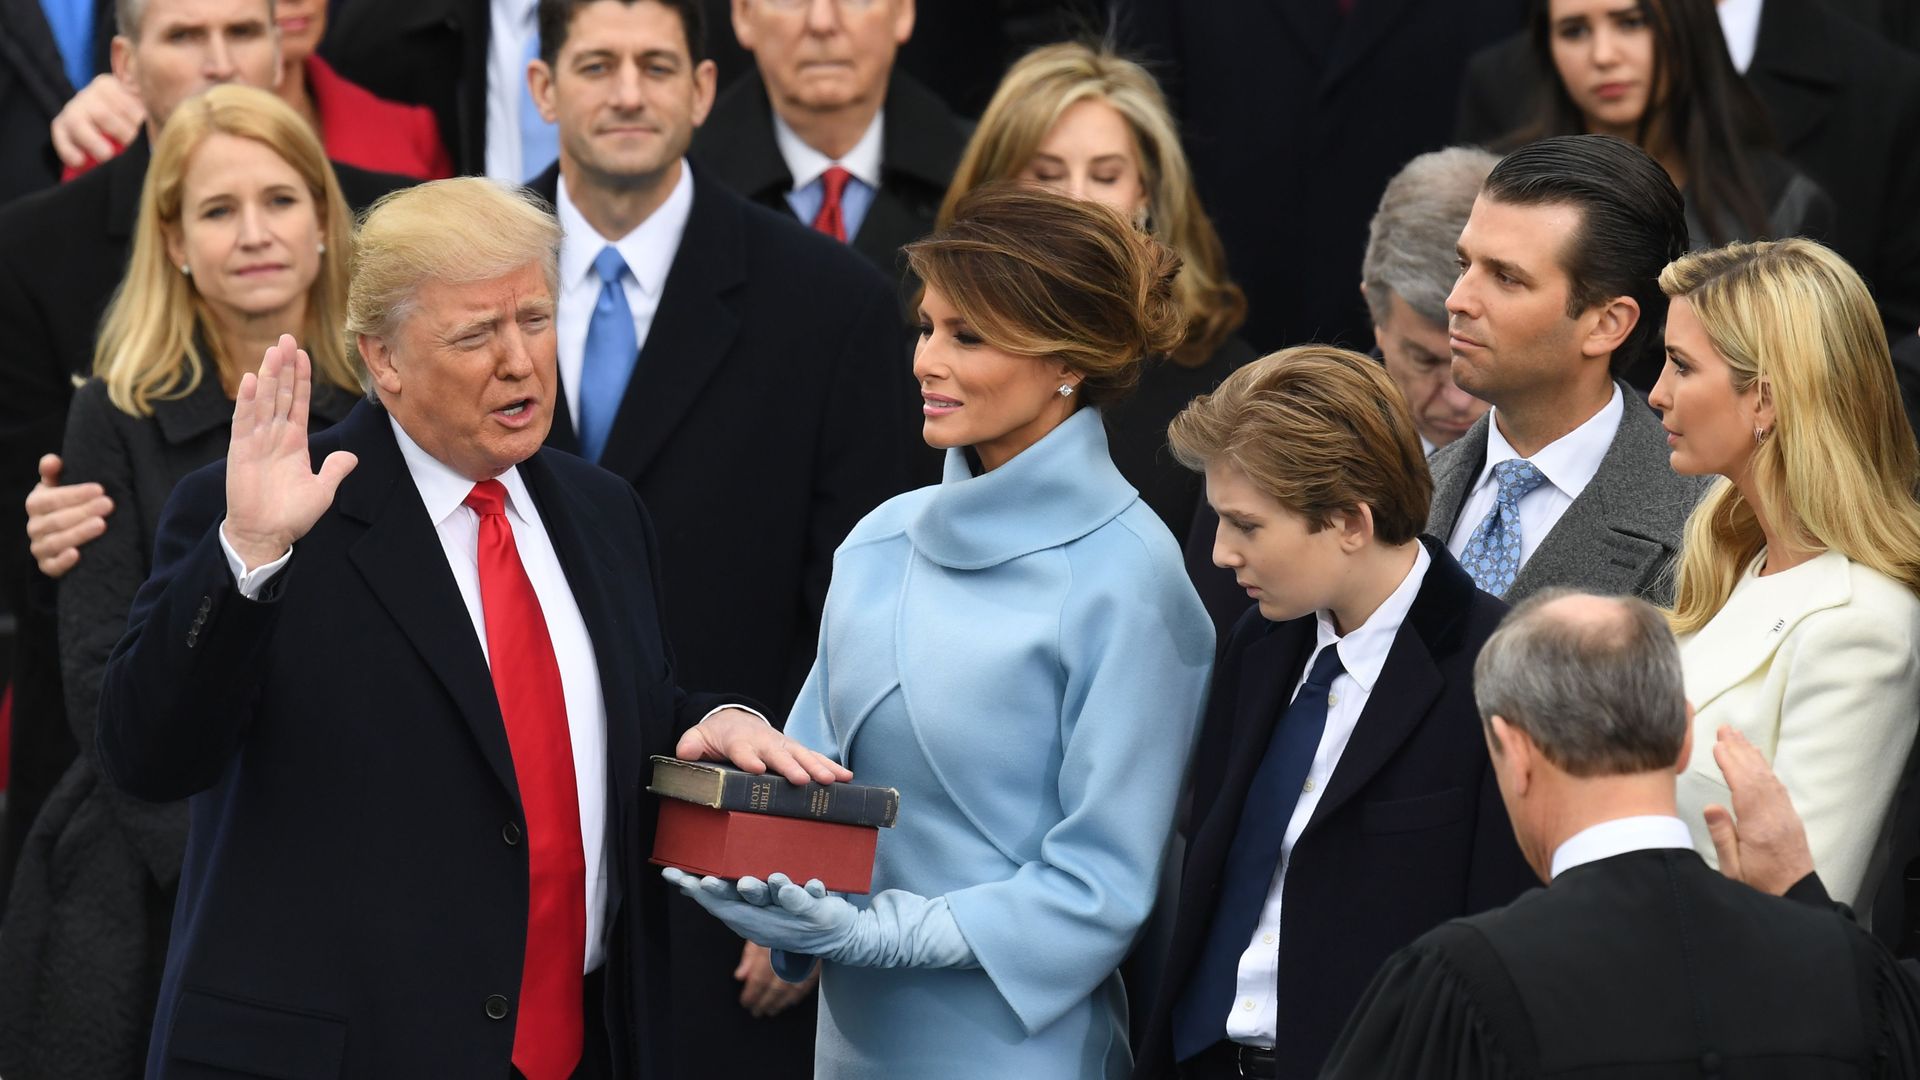 Photo of Donald Trump with his left hand on a Bible and his right hand raised as he is sworn into office